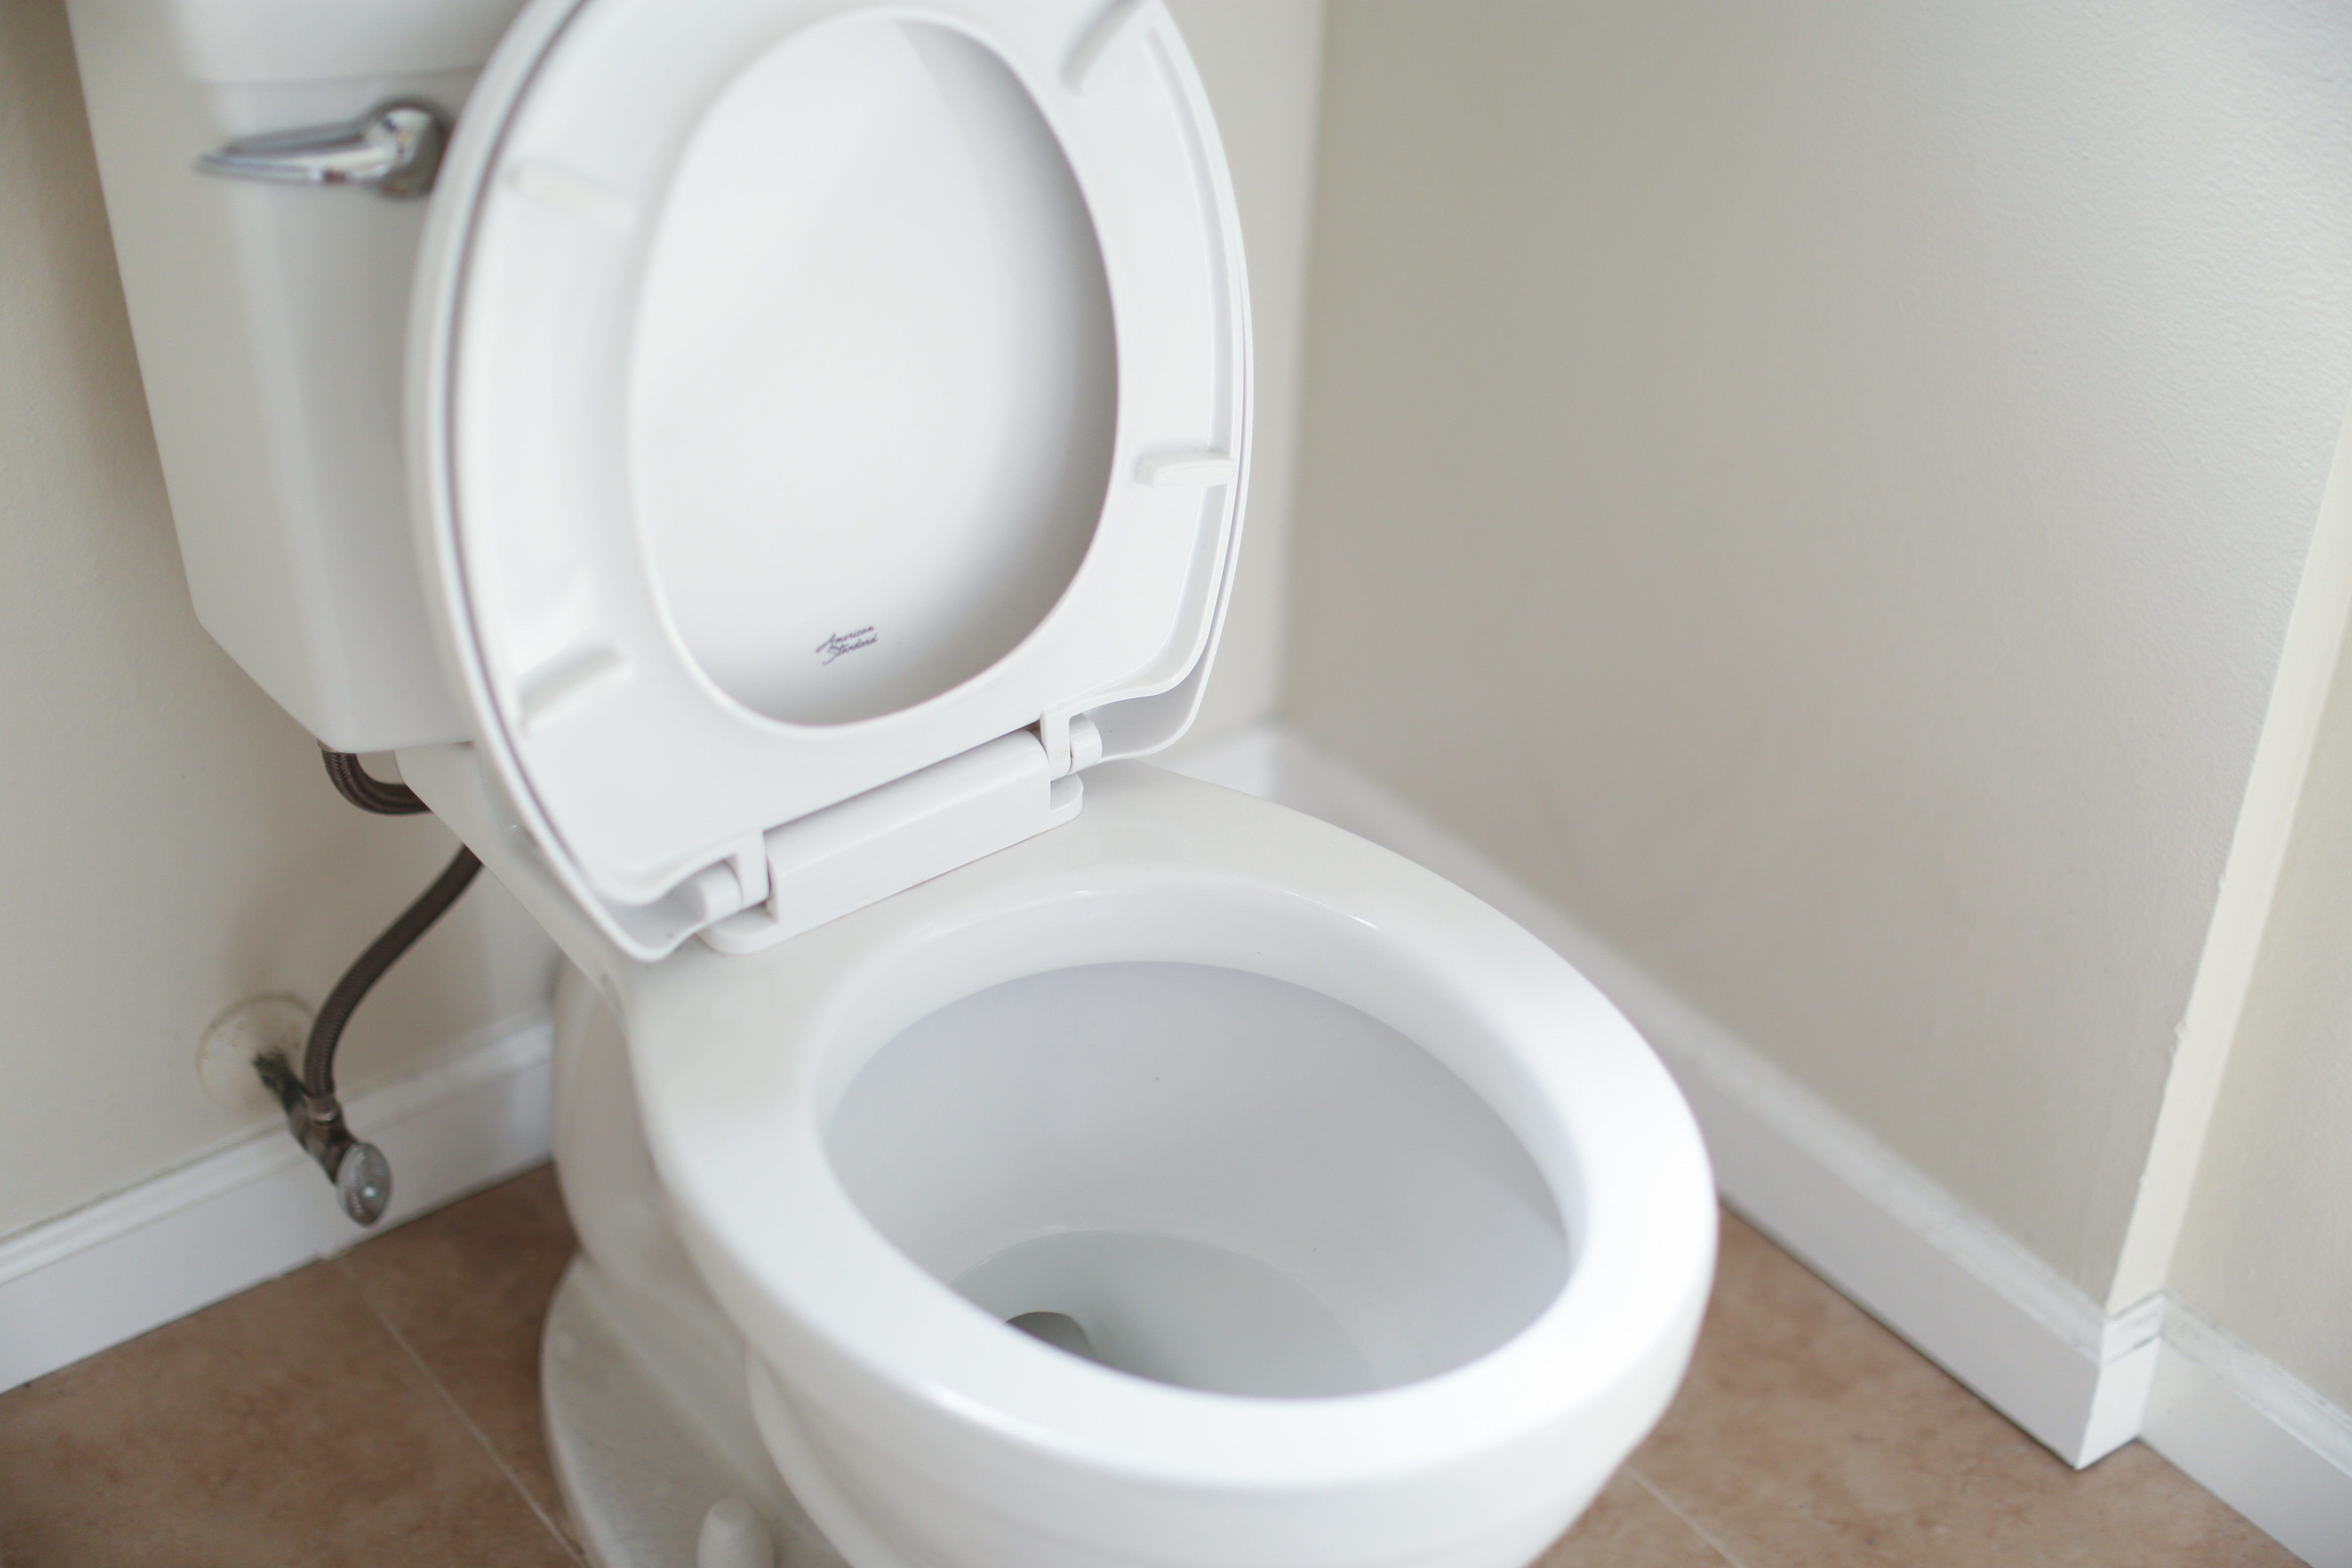 5 Key Factors to Consider When Buying a New Toilet